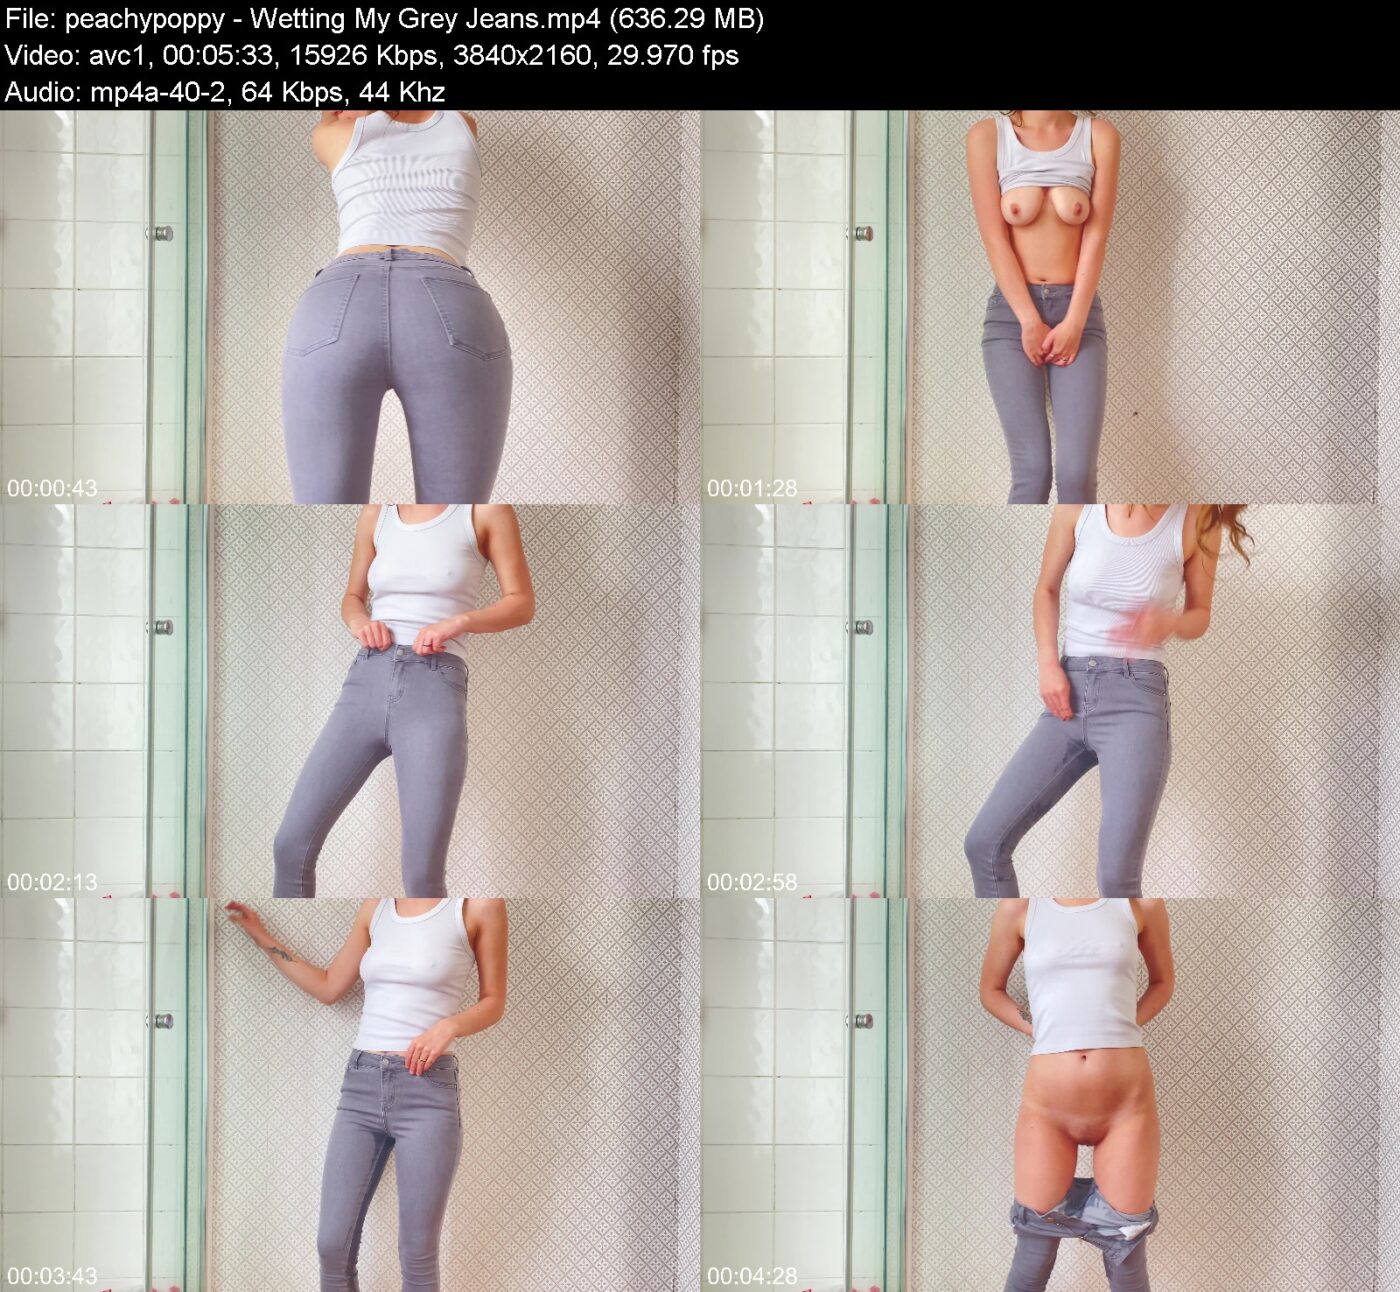 Actress: peachypoppy. Title and Studio: Wetting My Grey Jeans